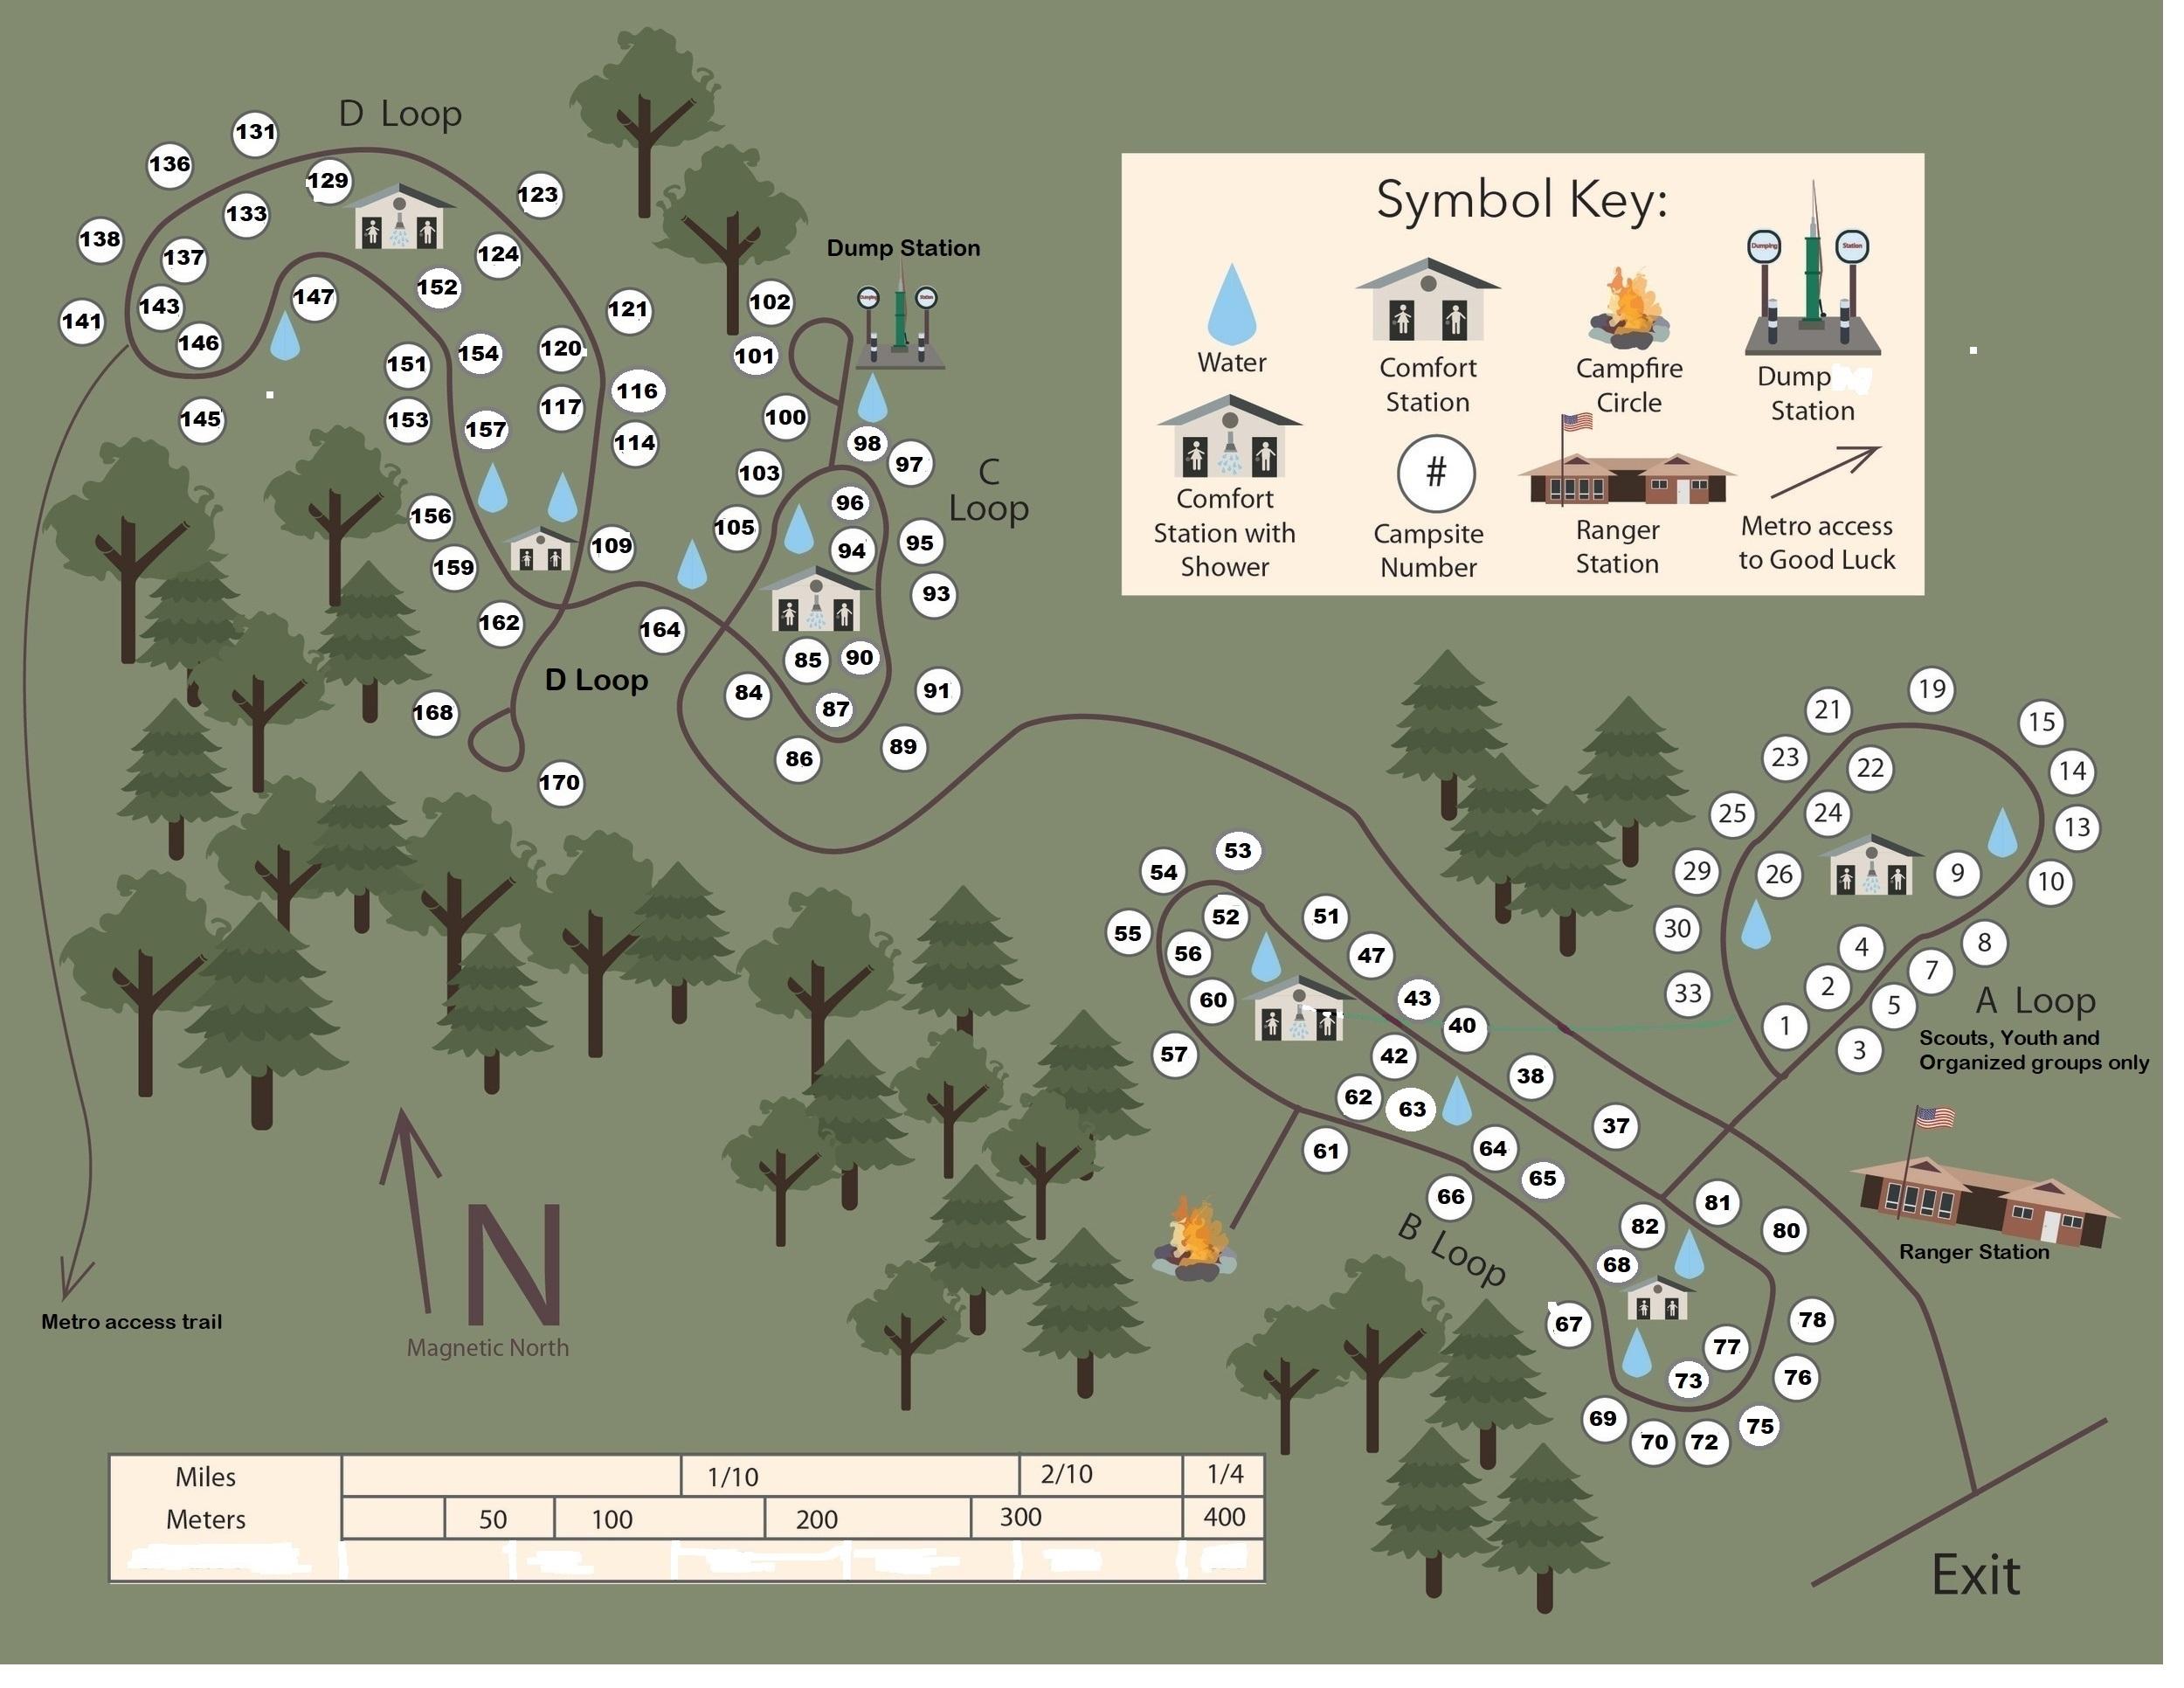 Overhead view of campground with numbered camp sites and locations of buildings